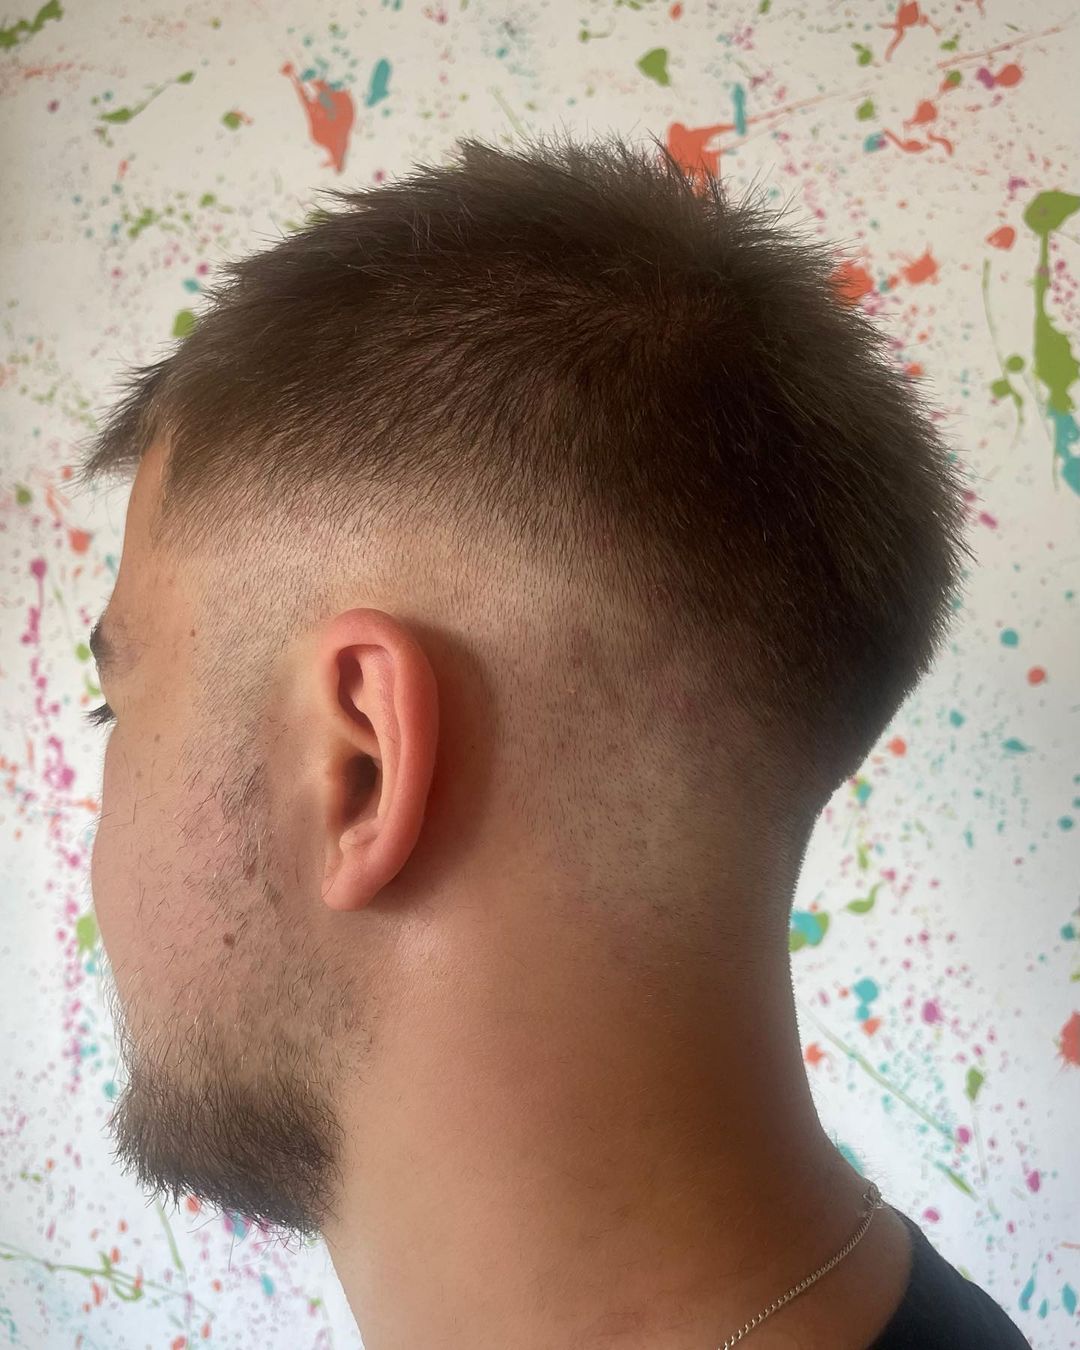 Classic Men's Hairstyles at Bliss Hair Salons in Nottingham and Loughborough